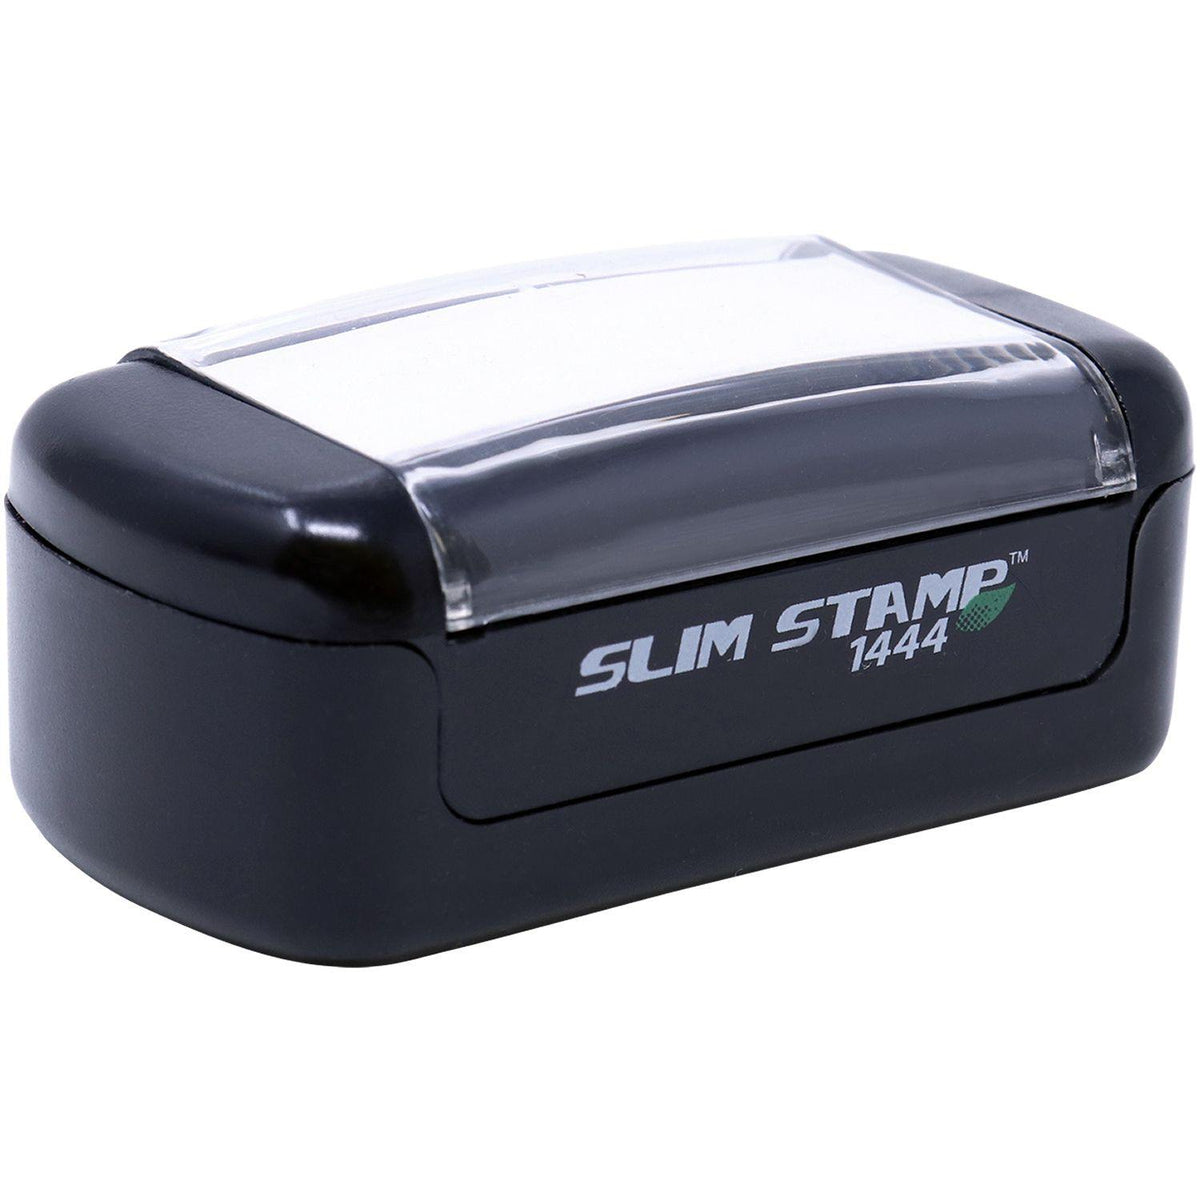 Alt View of Slim Pre Inked Community Property Stamp Mount Angle